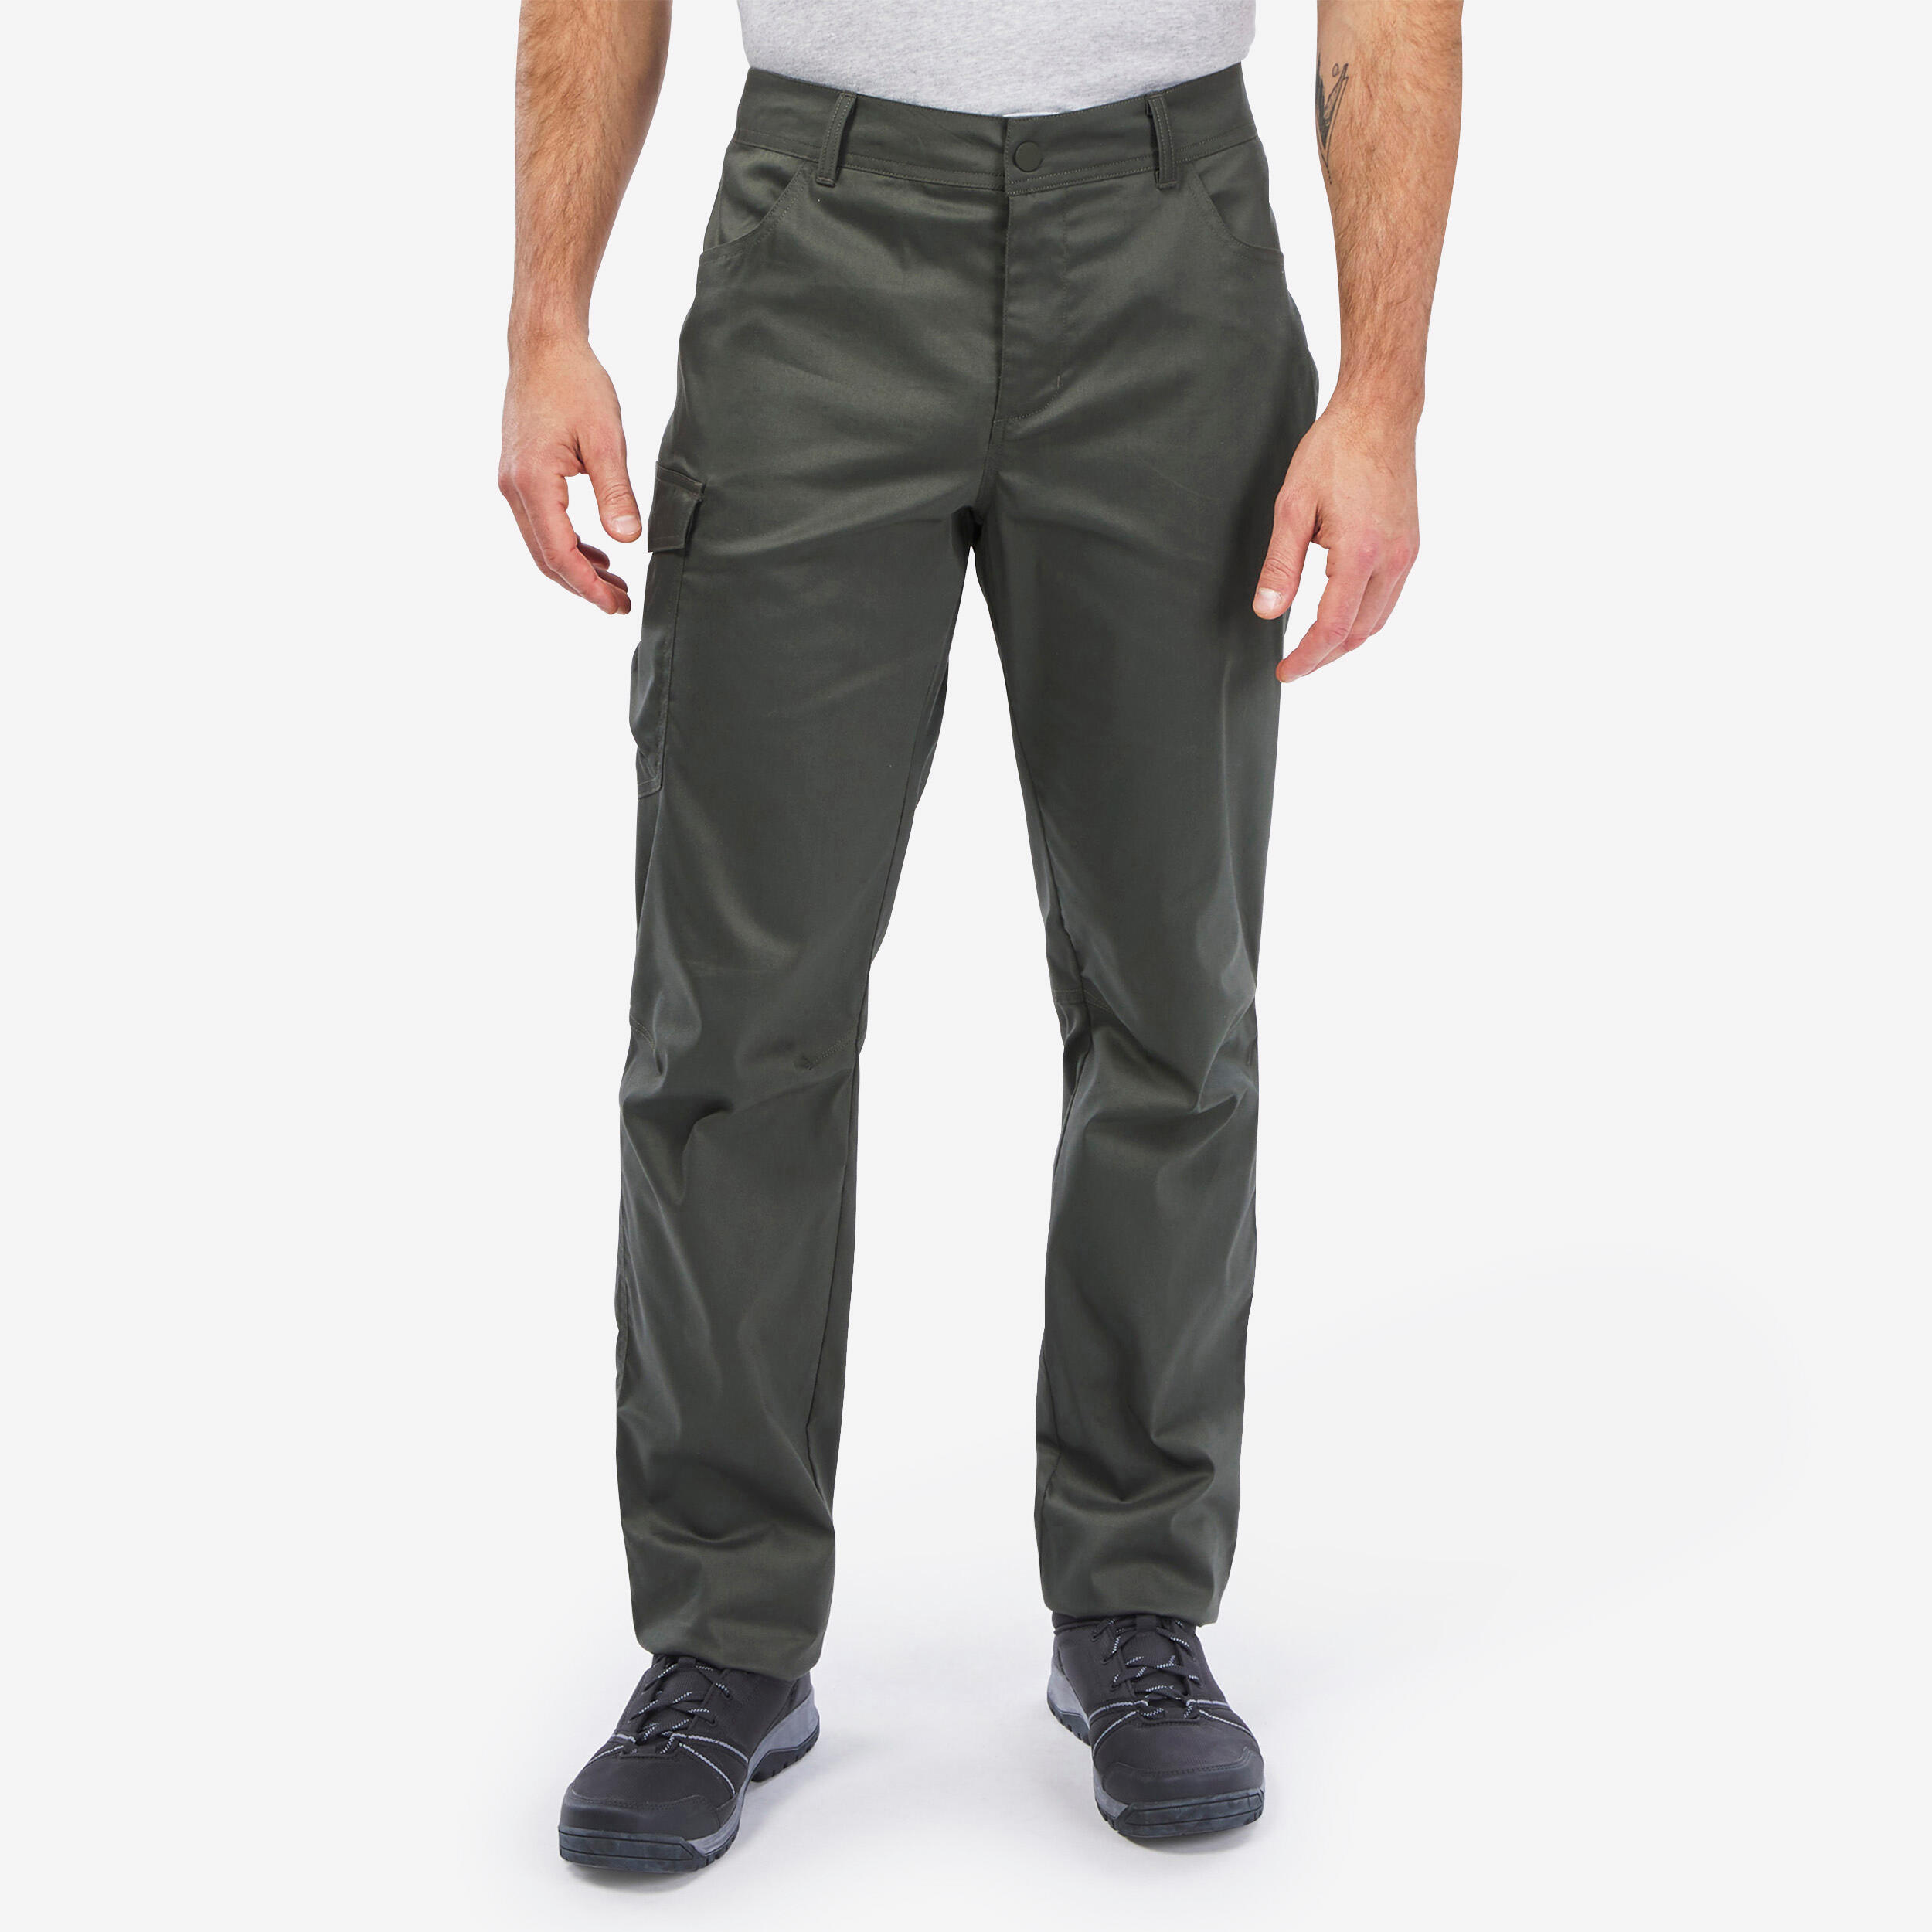 Men's Warm Water-Repellent Snow Hiking Trousers - SH100 ULTRA-WARM .